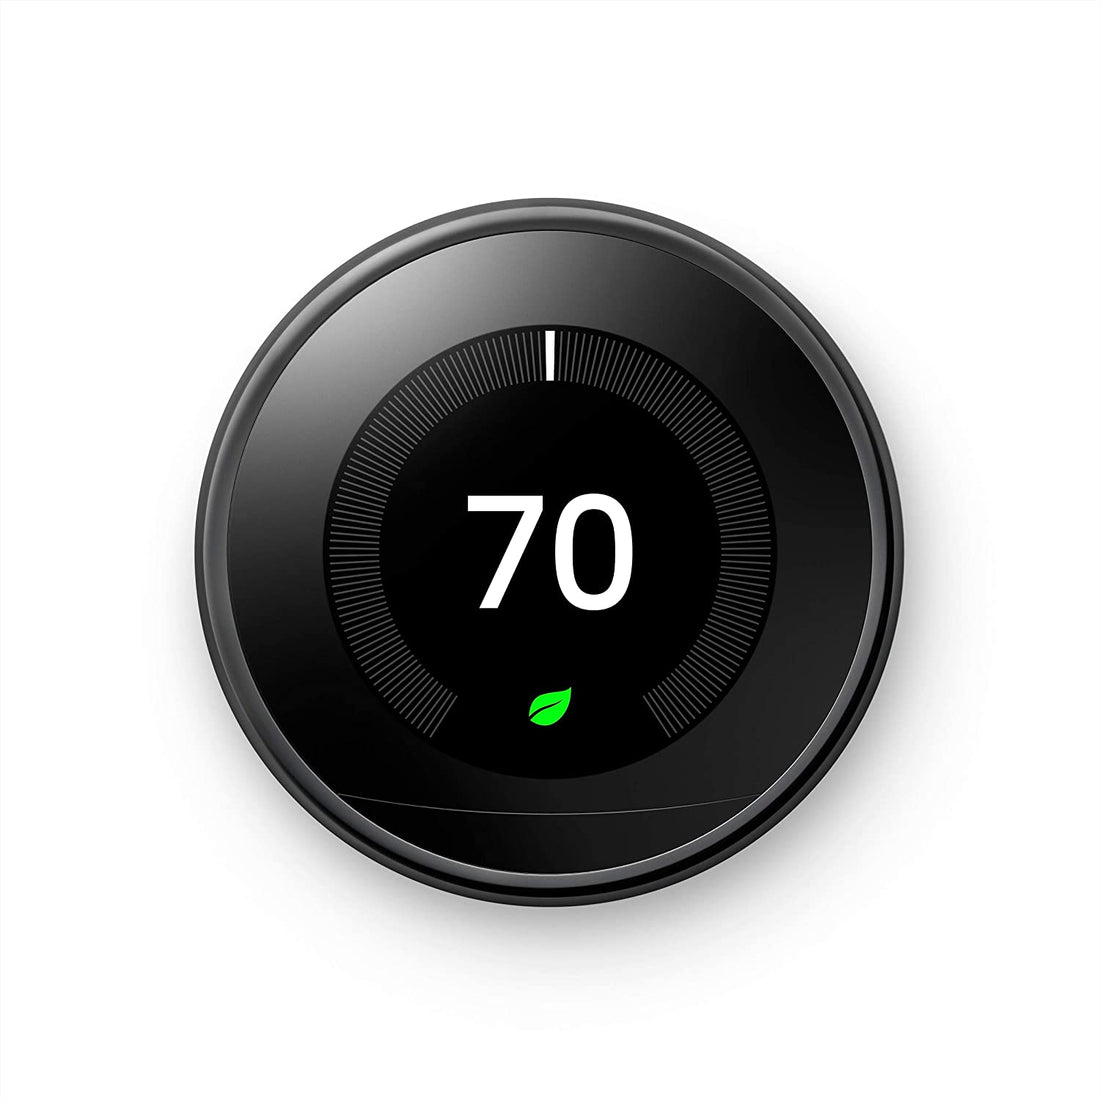 Google Nest Learning Thermostat 3rd Generation - Works with Alexa - Mirror Black (Refurbished)